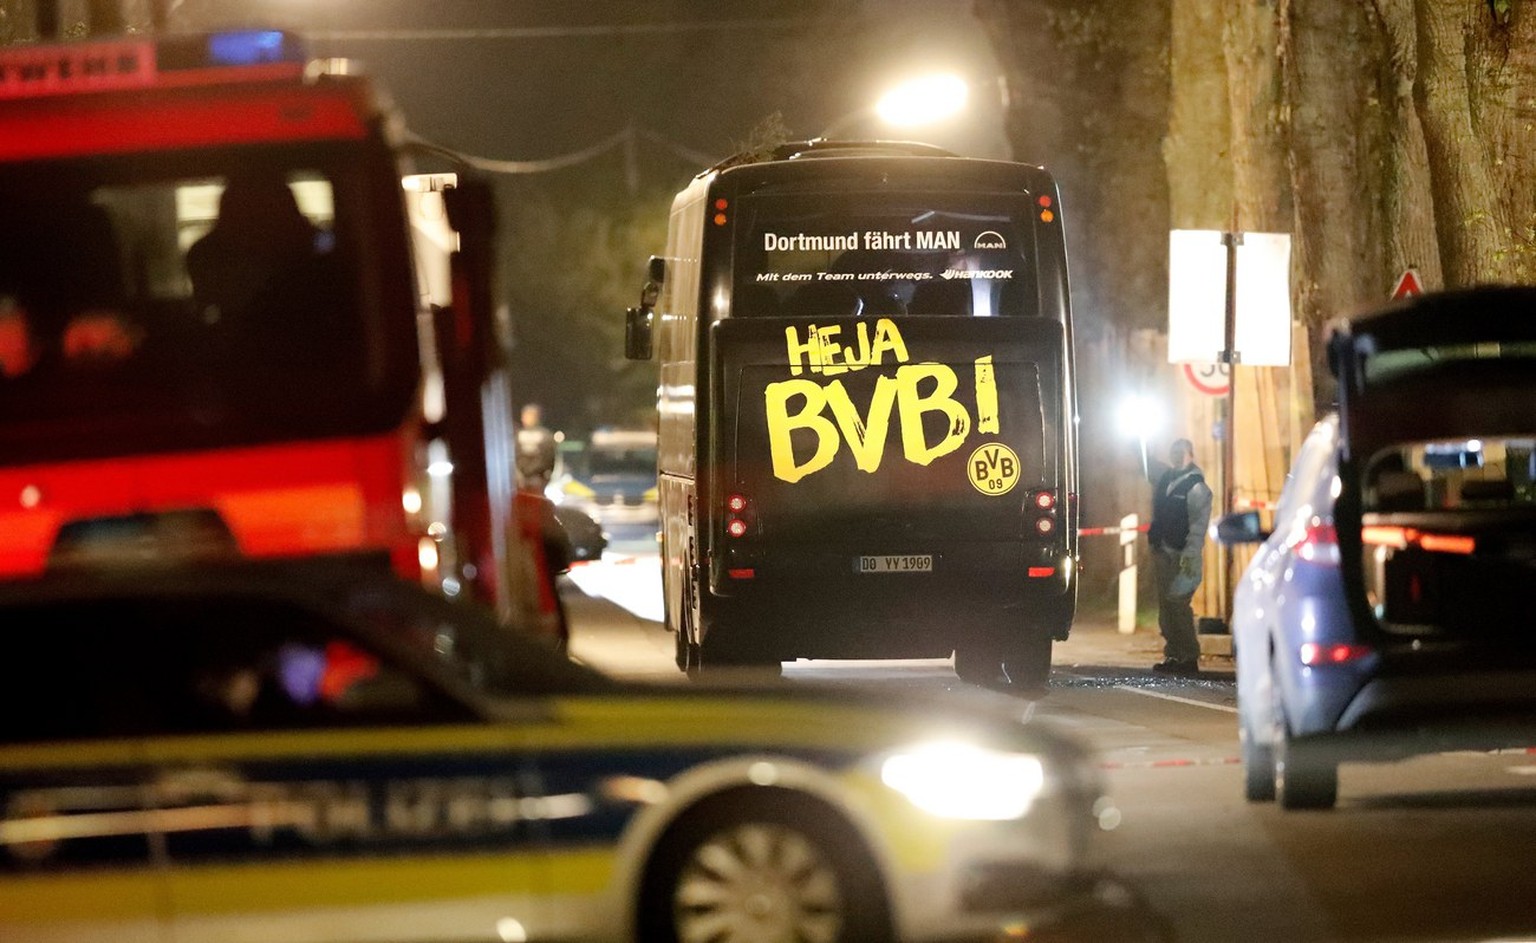 epa05903577 Team bus of Borussia Dortmund is seen on a street after it was hit by three explosions in Dortmund, Germany, 11 April 2017. According to reports, Borussia Dortmund&#039;s team bus was dama ...